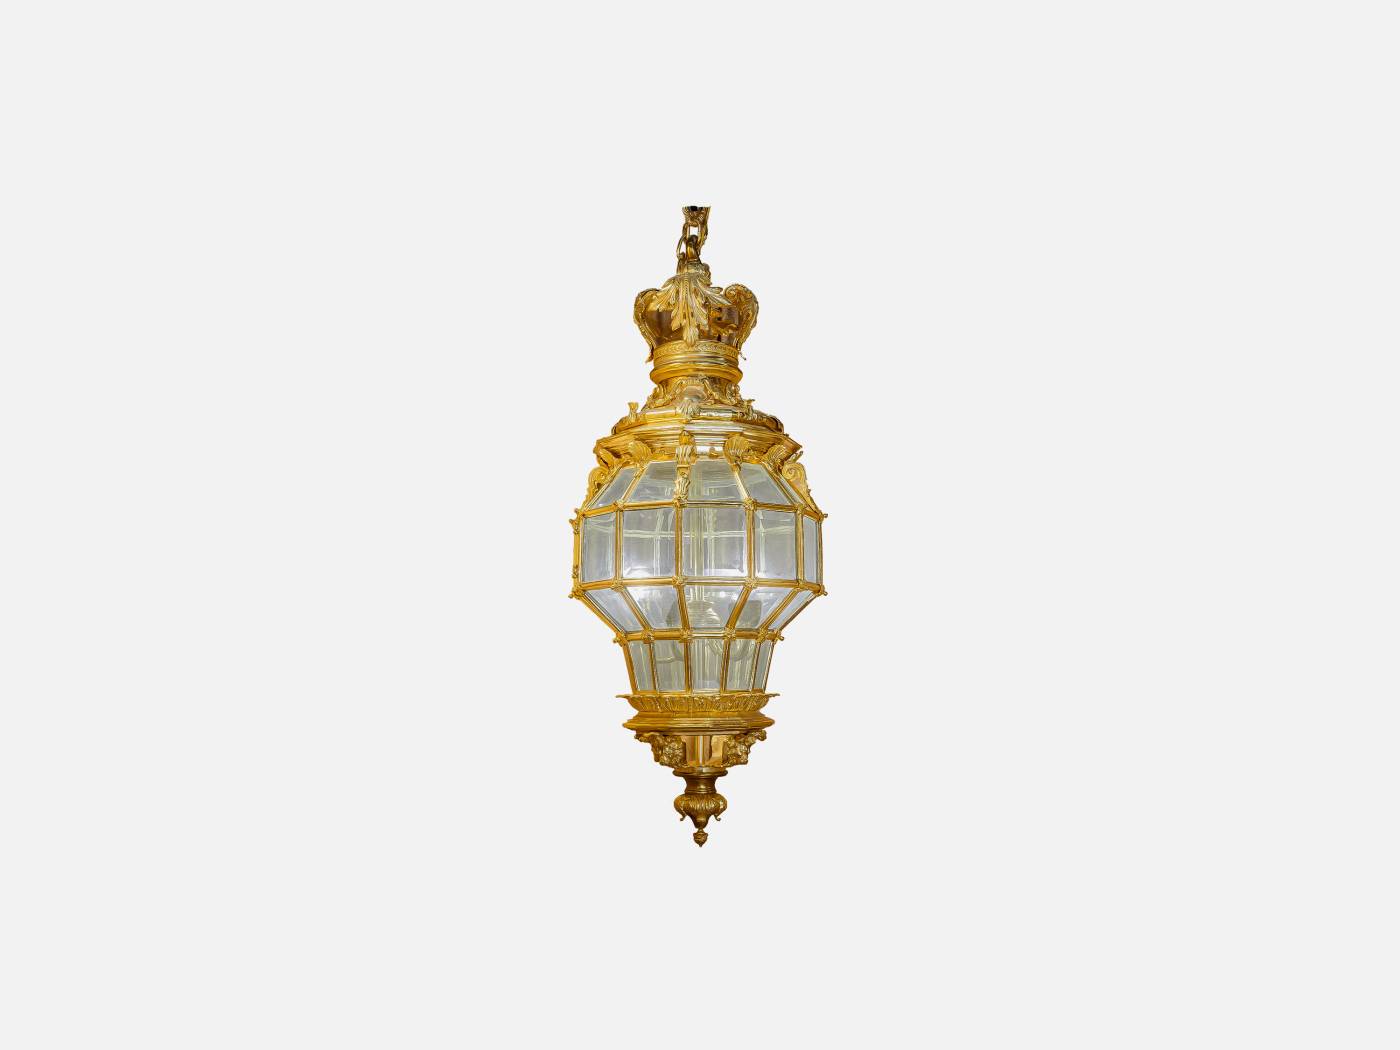 ART. 823 – Discover the elegance of luxury classic Lighting made in Italy by C.G. Capelletti. Luxury classic furniture that combines style and craftsmanship.